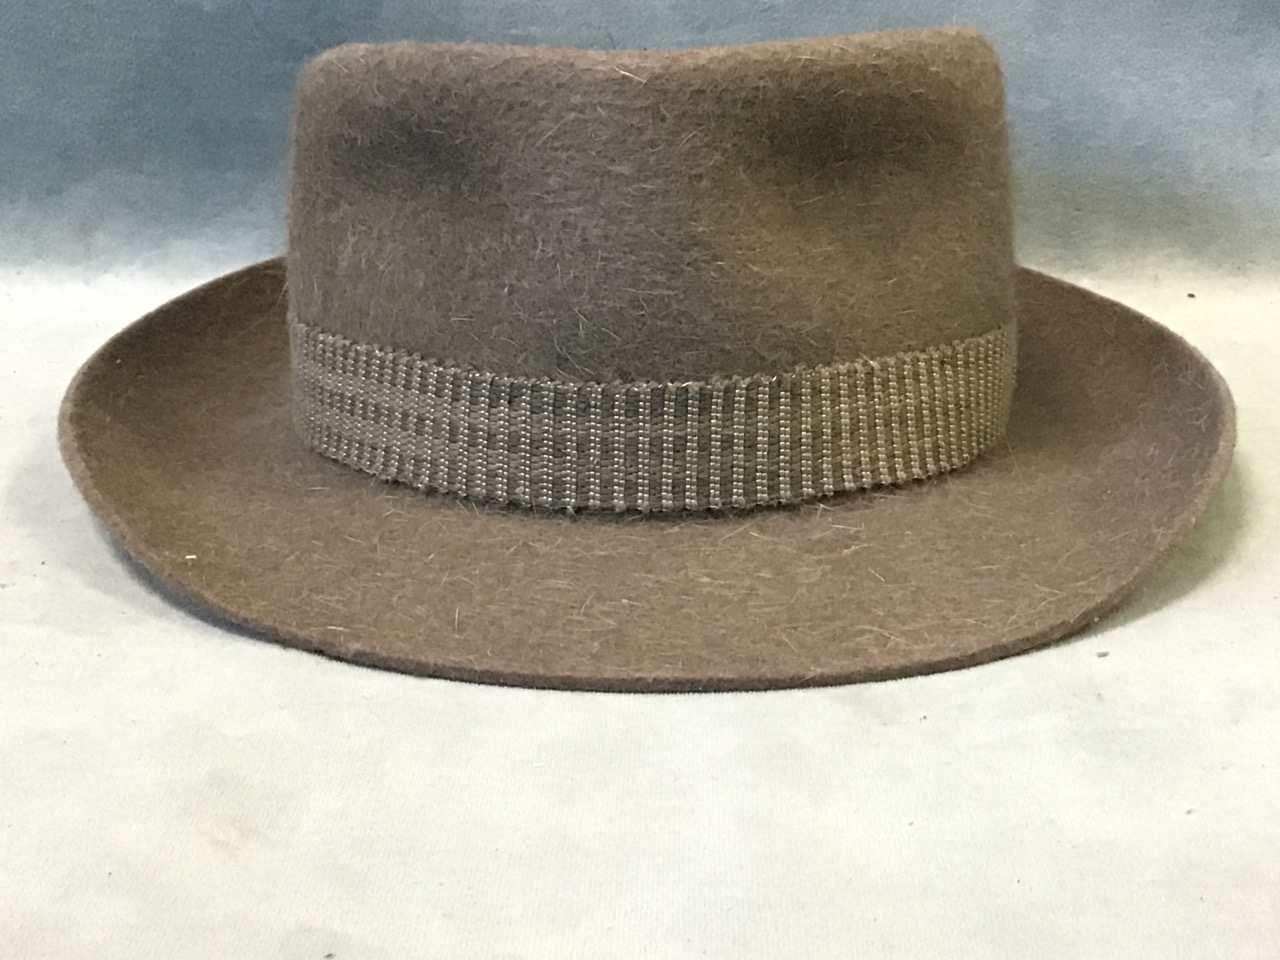 A 50s Attaboy pork pie hat with striped band and labelled leather interior - size 6 7/8. (7.5in x - Image 3 of 3